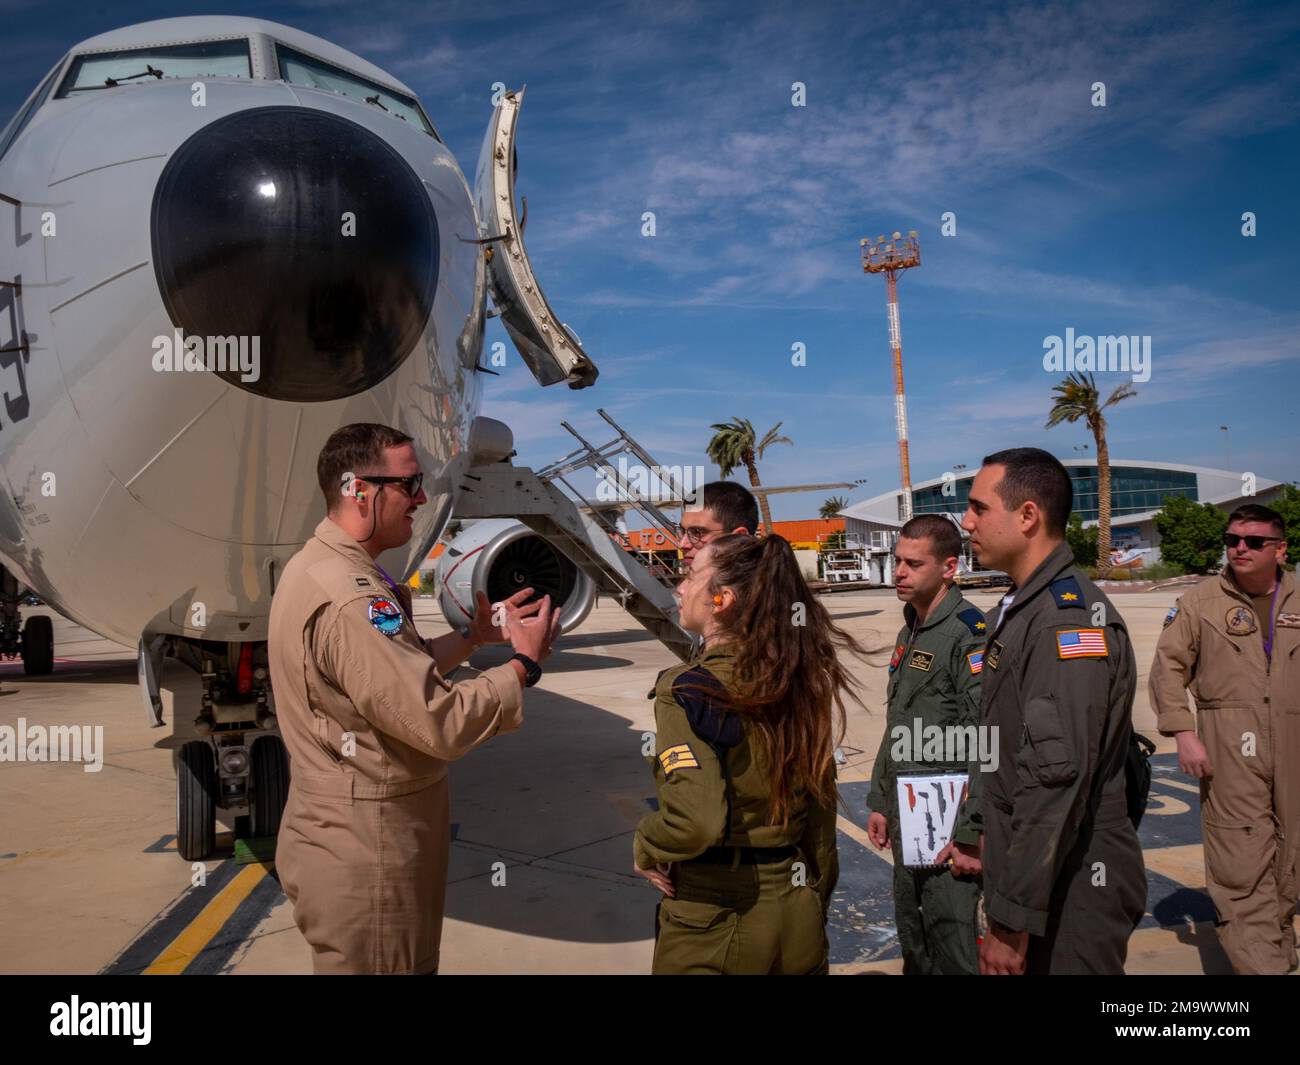 220520-N-VH871-1272 OVDA AIR FORCE BASE, Israel (May 20, 2022) Lt. Josh Schuh, assigned to the 'Grey Knights' of Patrol Squadron (VP) 46, deployed with Commander, Task Force (CTF) 57, conducts a tour of a P-8A maritime patrol aircraft to members of the Israeli Navy, May 20. CTF 57 aircraft conduct missions in support of maritime operations to ensure security and stability in the Middle East region. Stock Photo